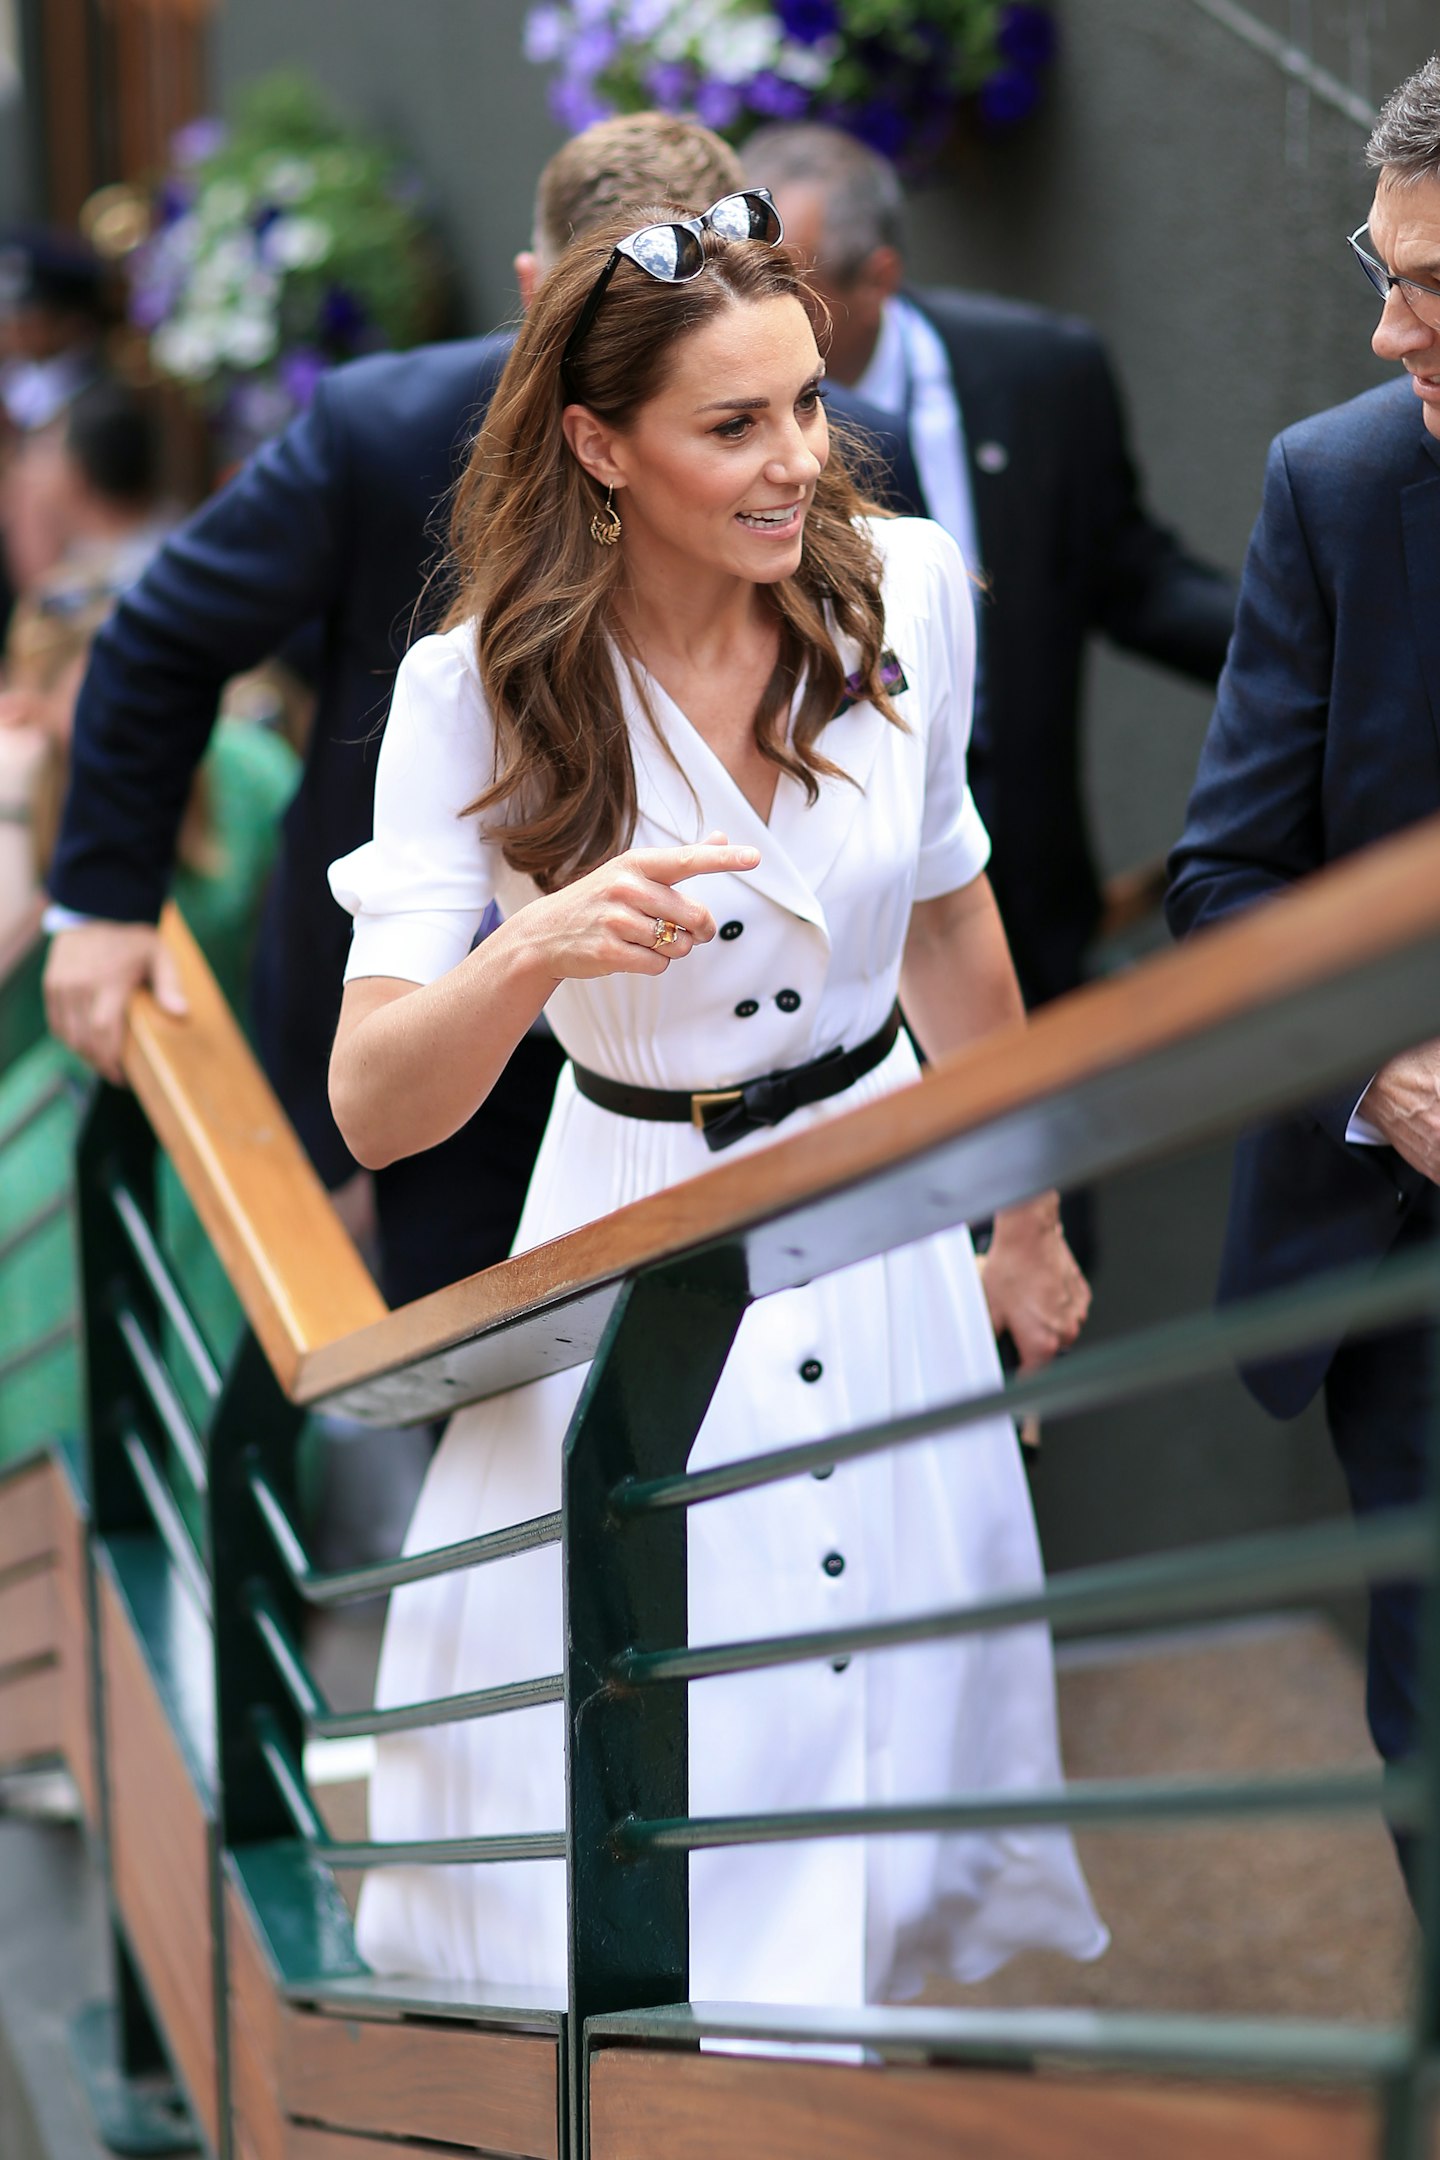 The Duchess of Cambridge at Wimbledon in a dress by Suzannah 